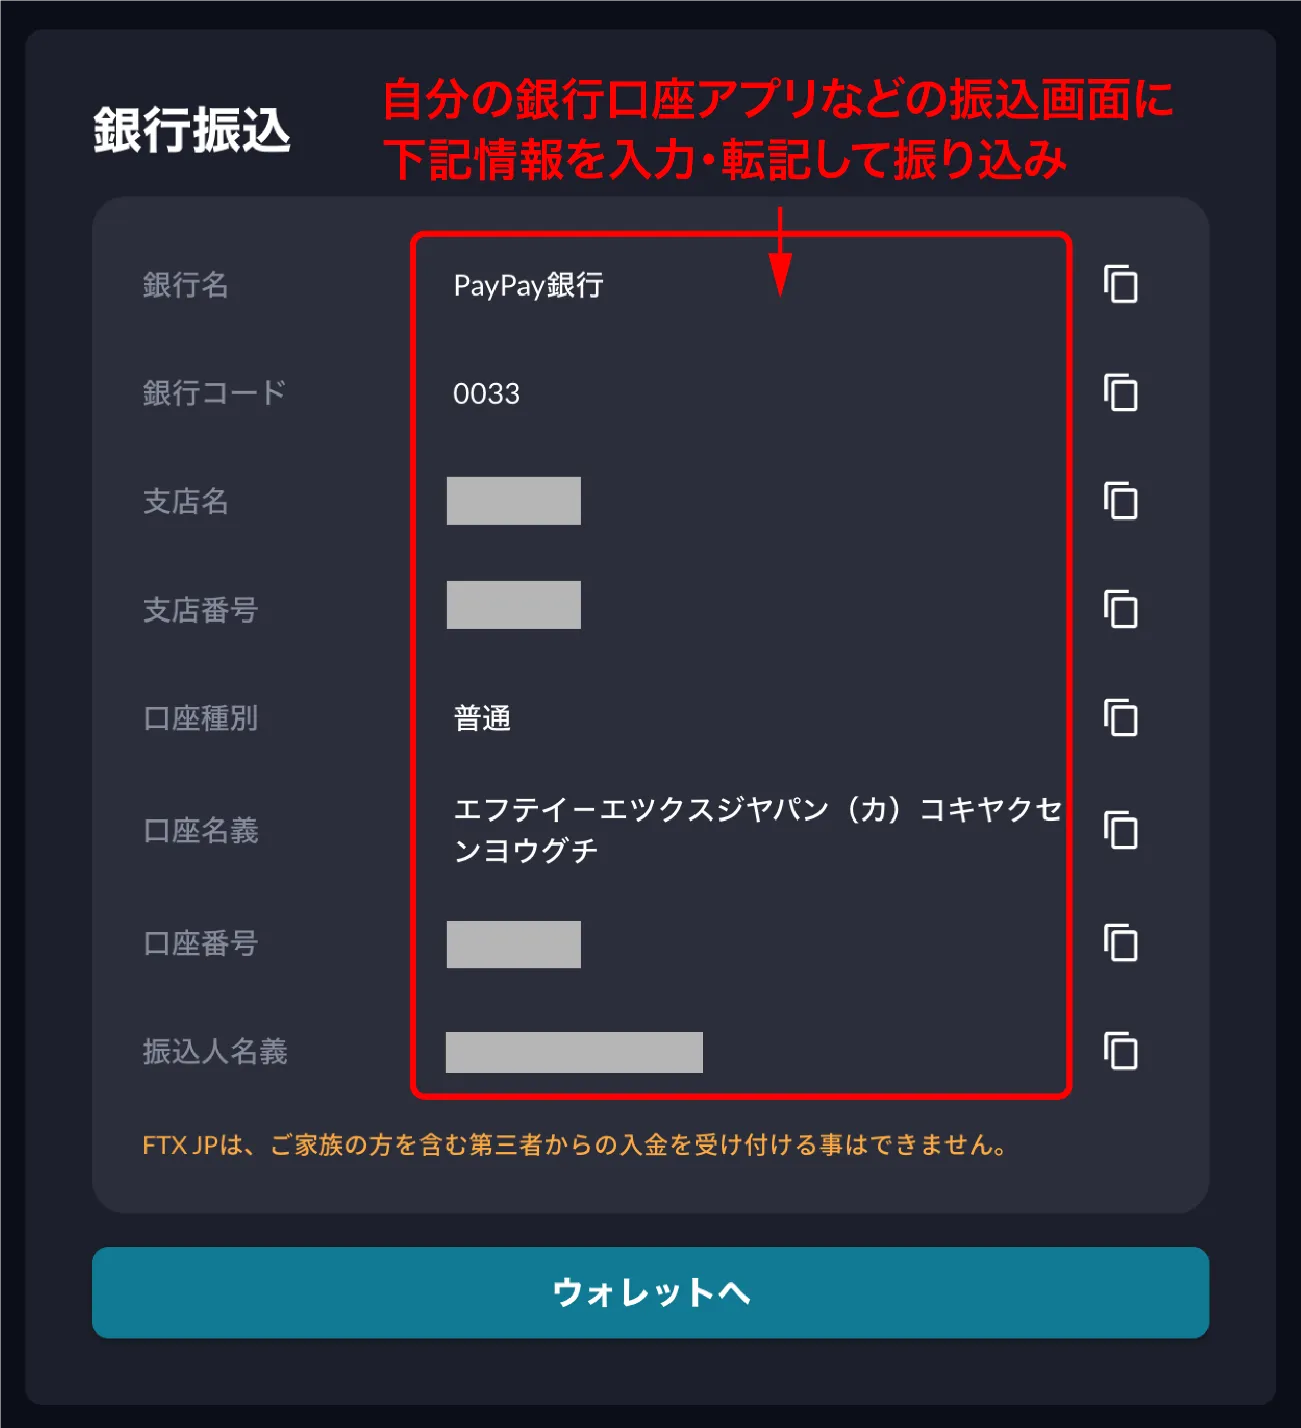 how-to-deposit-to-ftx-jp09-Bank-transfer-screen-2